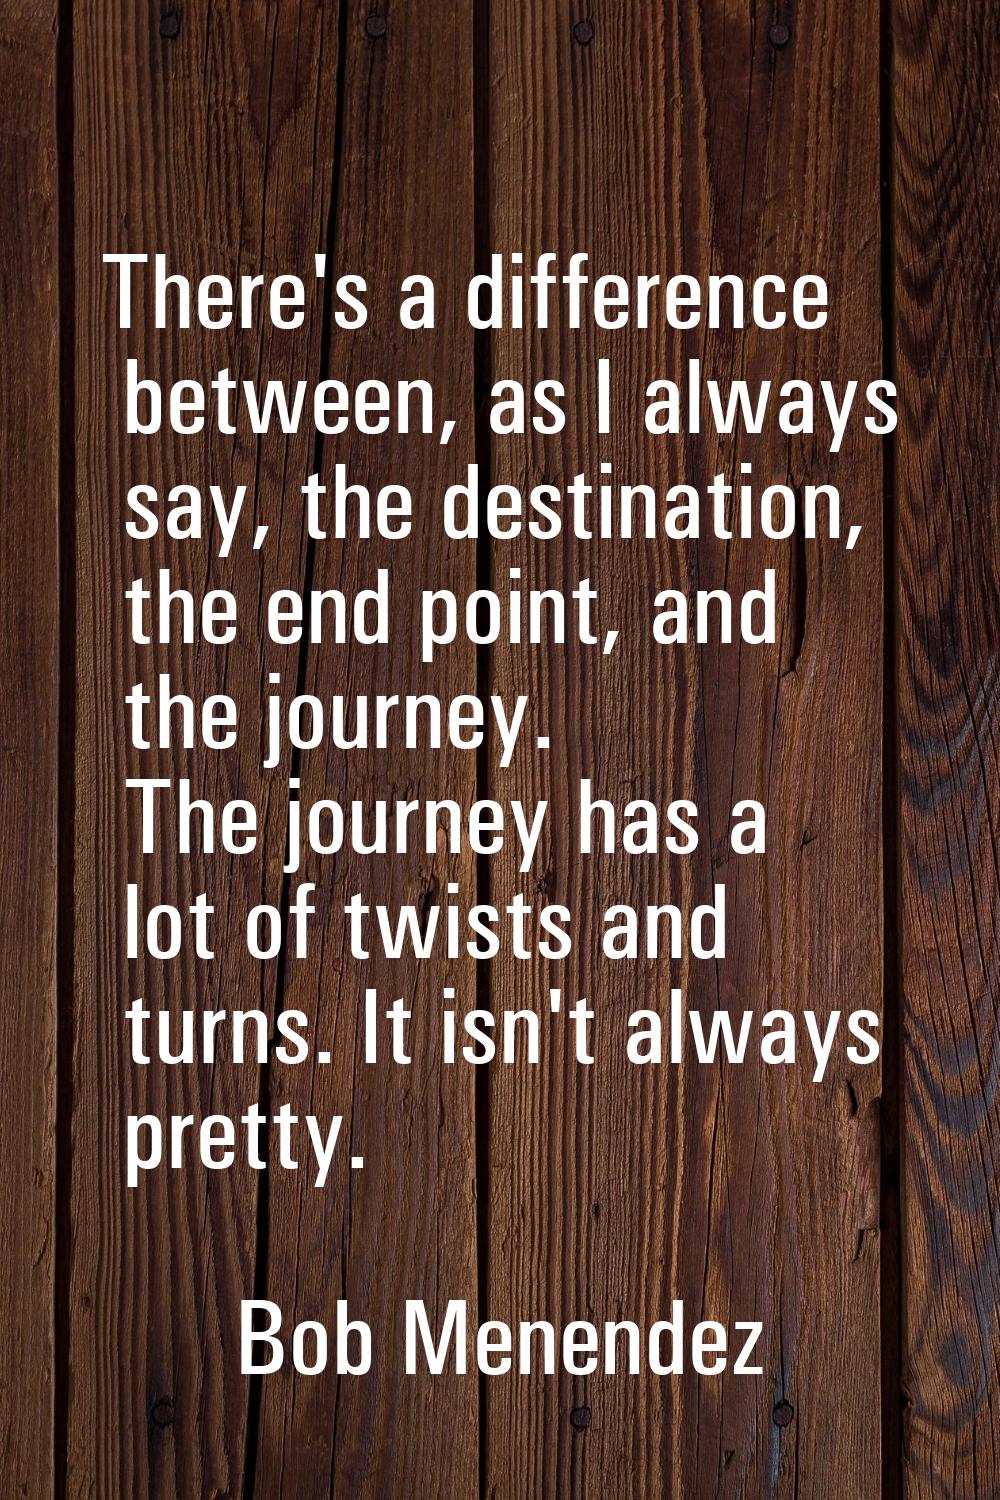 There's a difference between, as I always say, the destination, the end point, and the journey. The